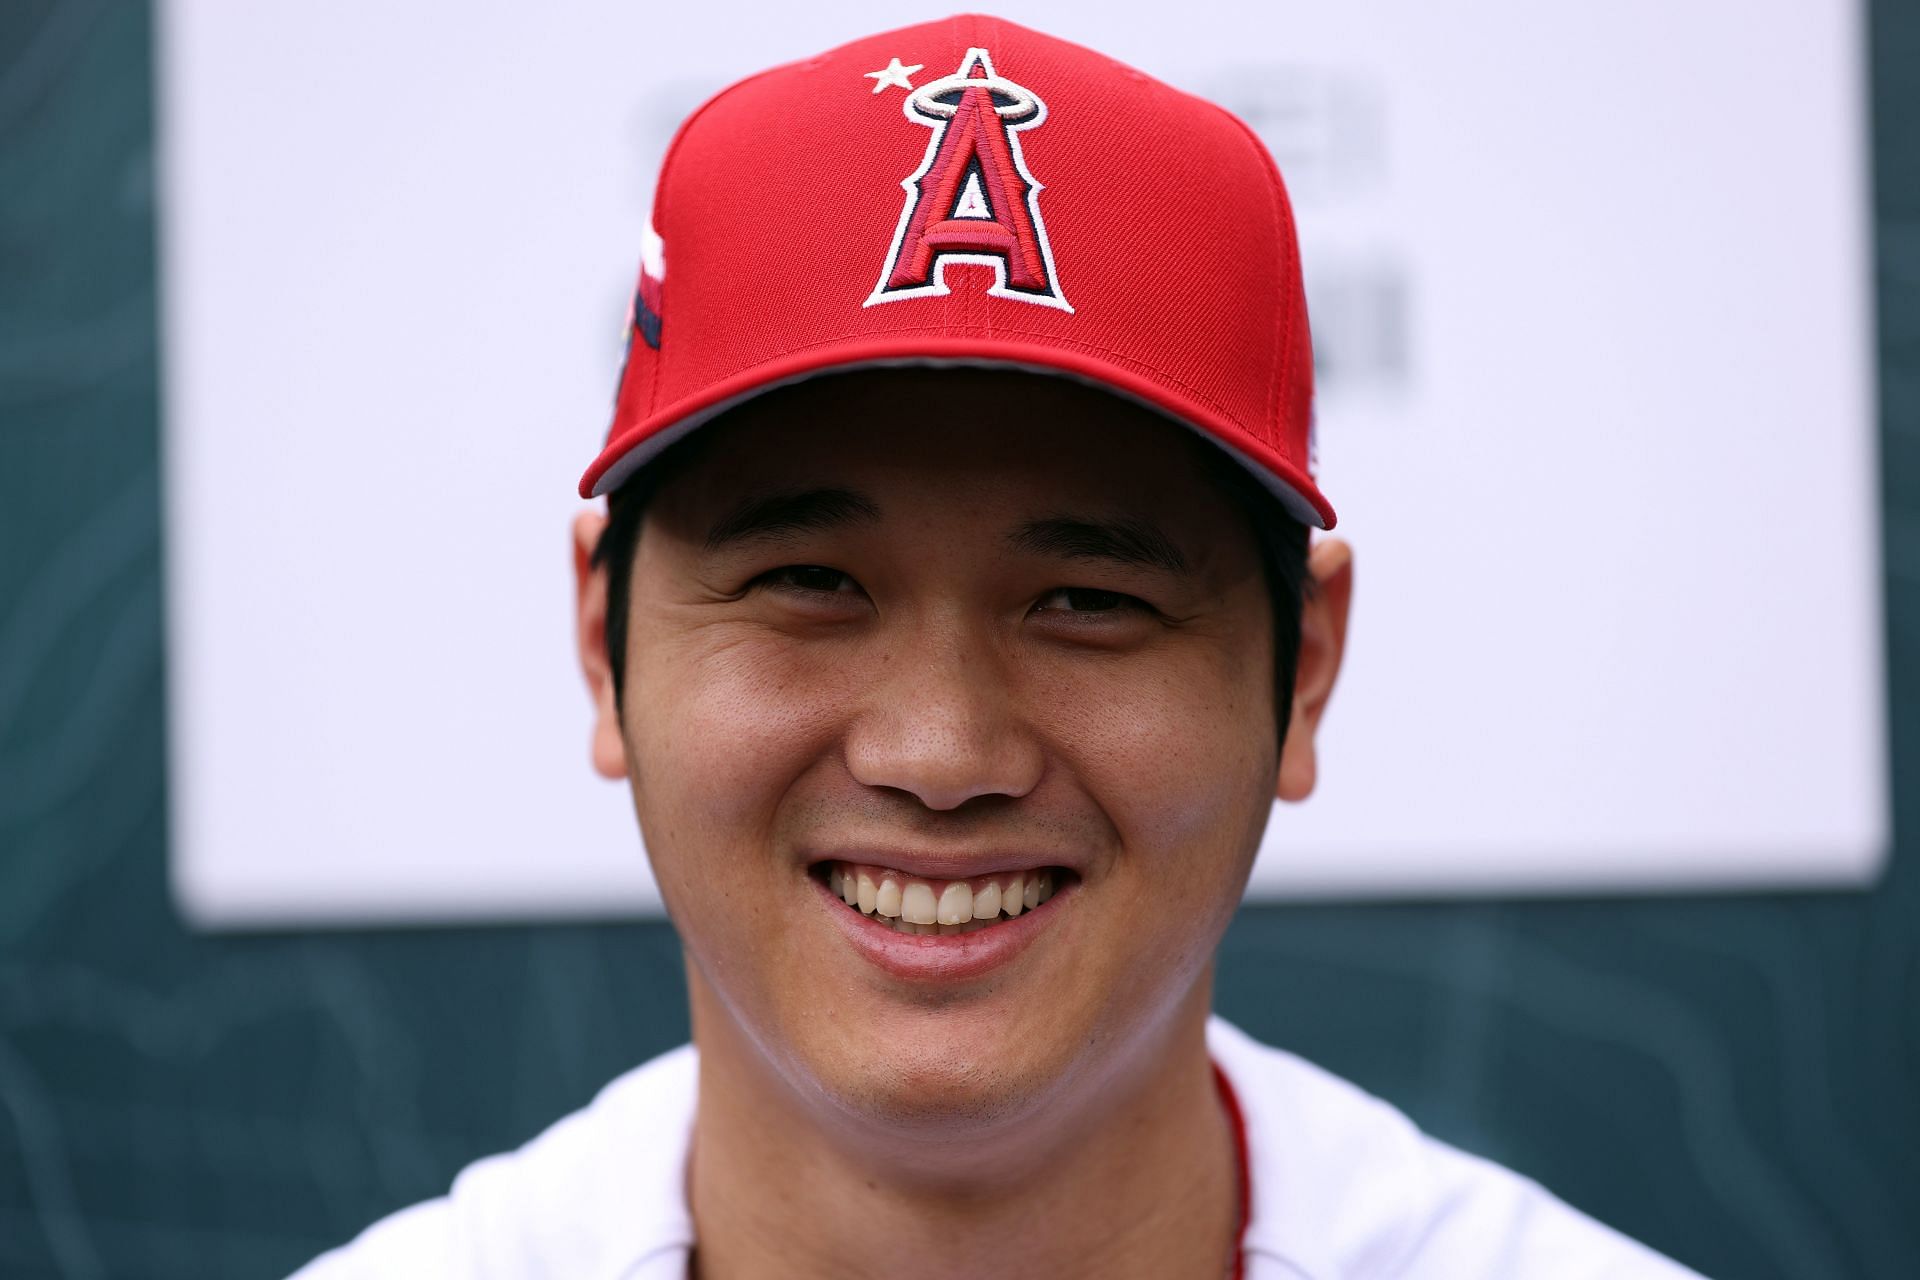 Shohei Ohtani of the Los Angeles Angels speaks to the media during Gatorade All-Star Workout Day at T-Mobile Park in Seattle, Washington.